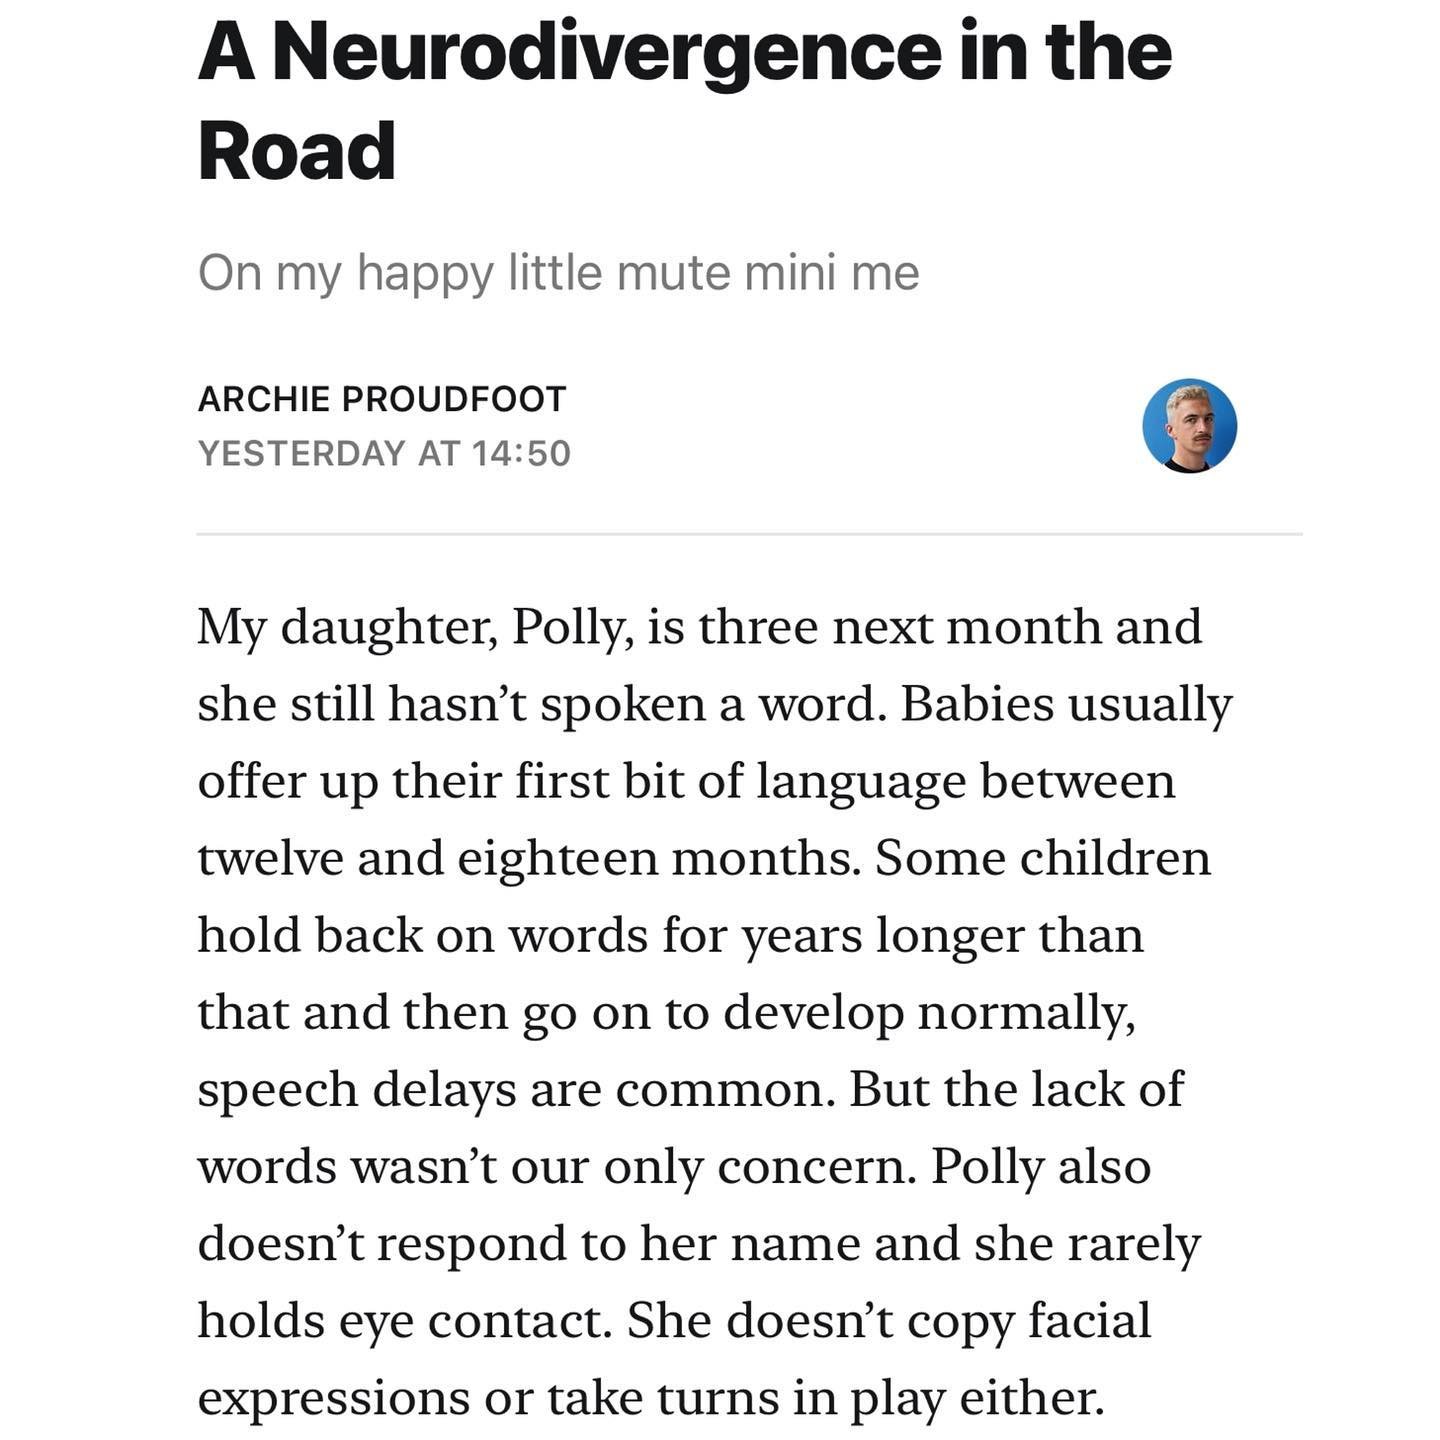 This week&rsquo;s Substack is about the power of early intervention, Instagram reels doing the NHS&rsquo;s job and the strange limbo phase of parenting a child you know is neurodiverse but isn&rsquo;t officially diagnosed yet. Link in bio to the full